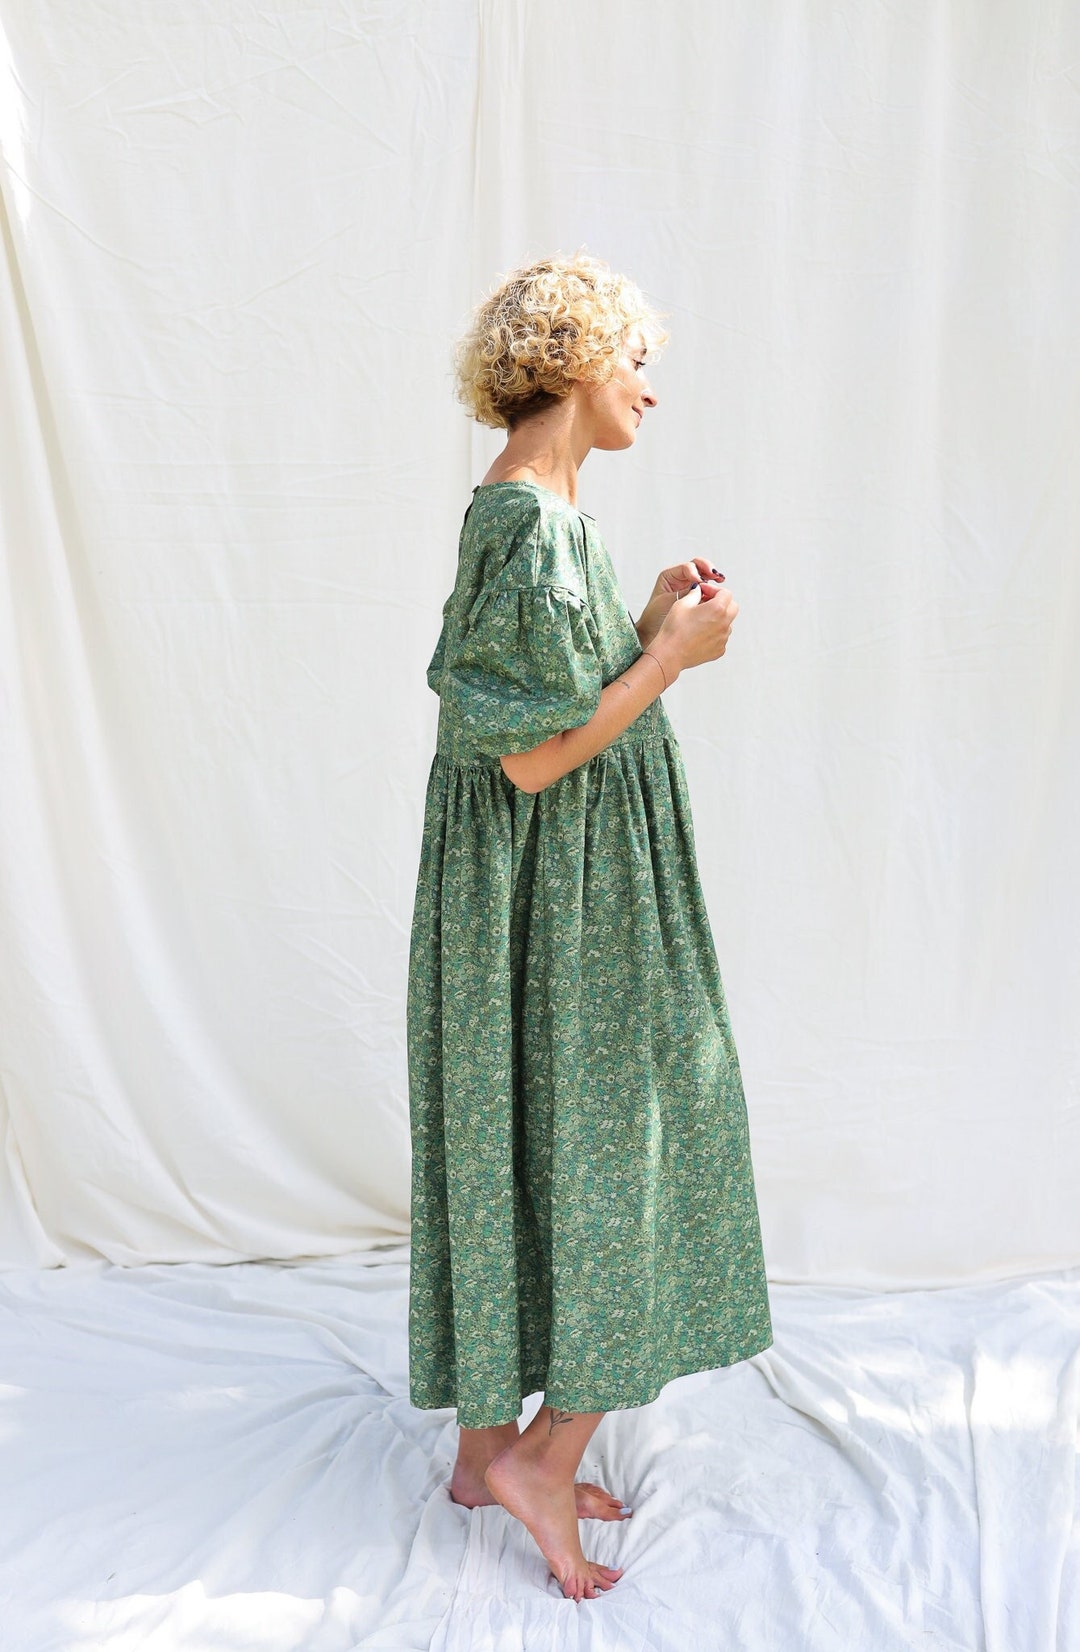 Floral Puff Sleeves Dress THORPE HILL OFFON Clothing - Etsy